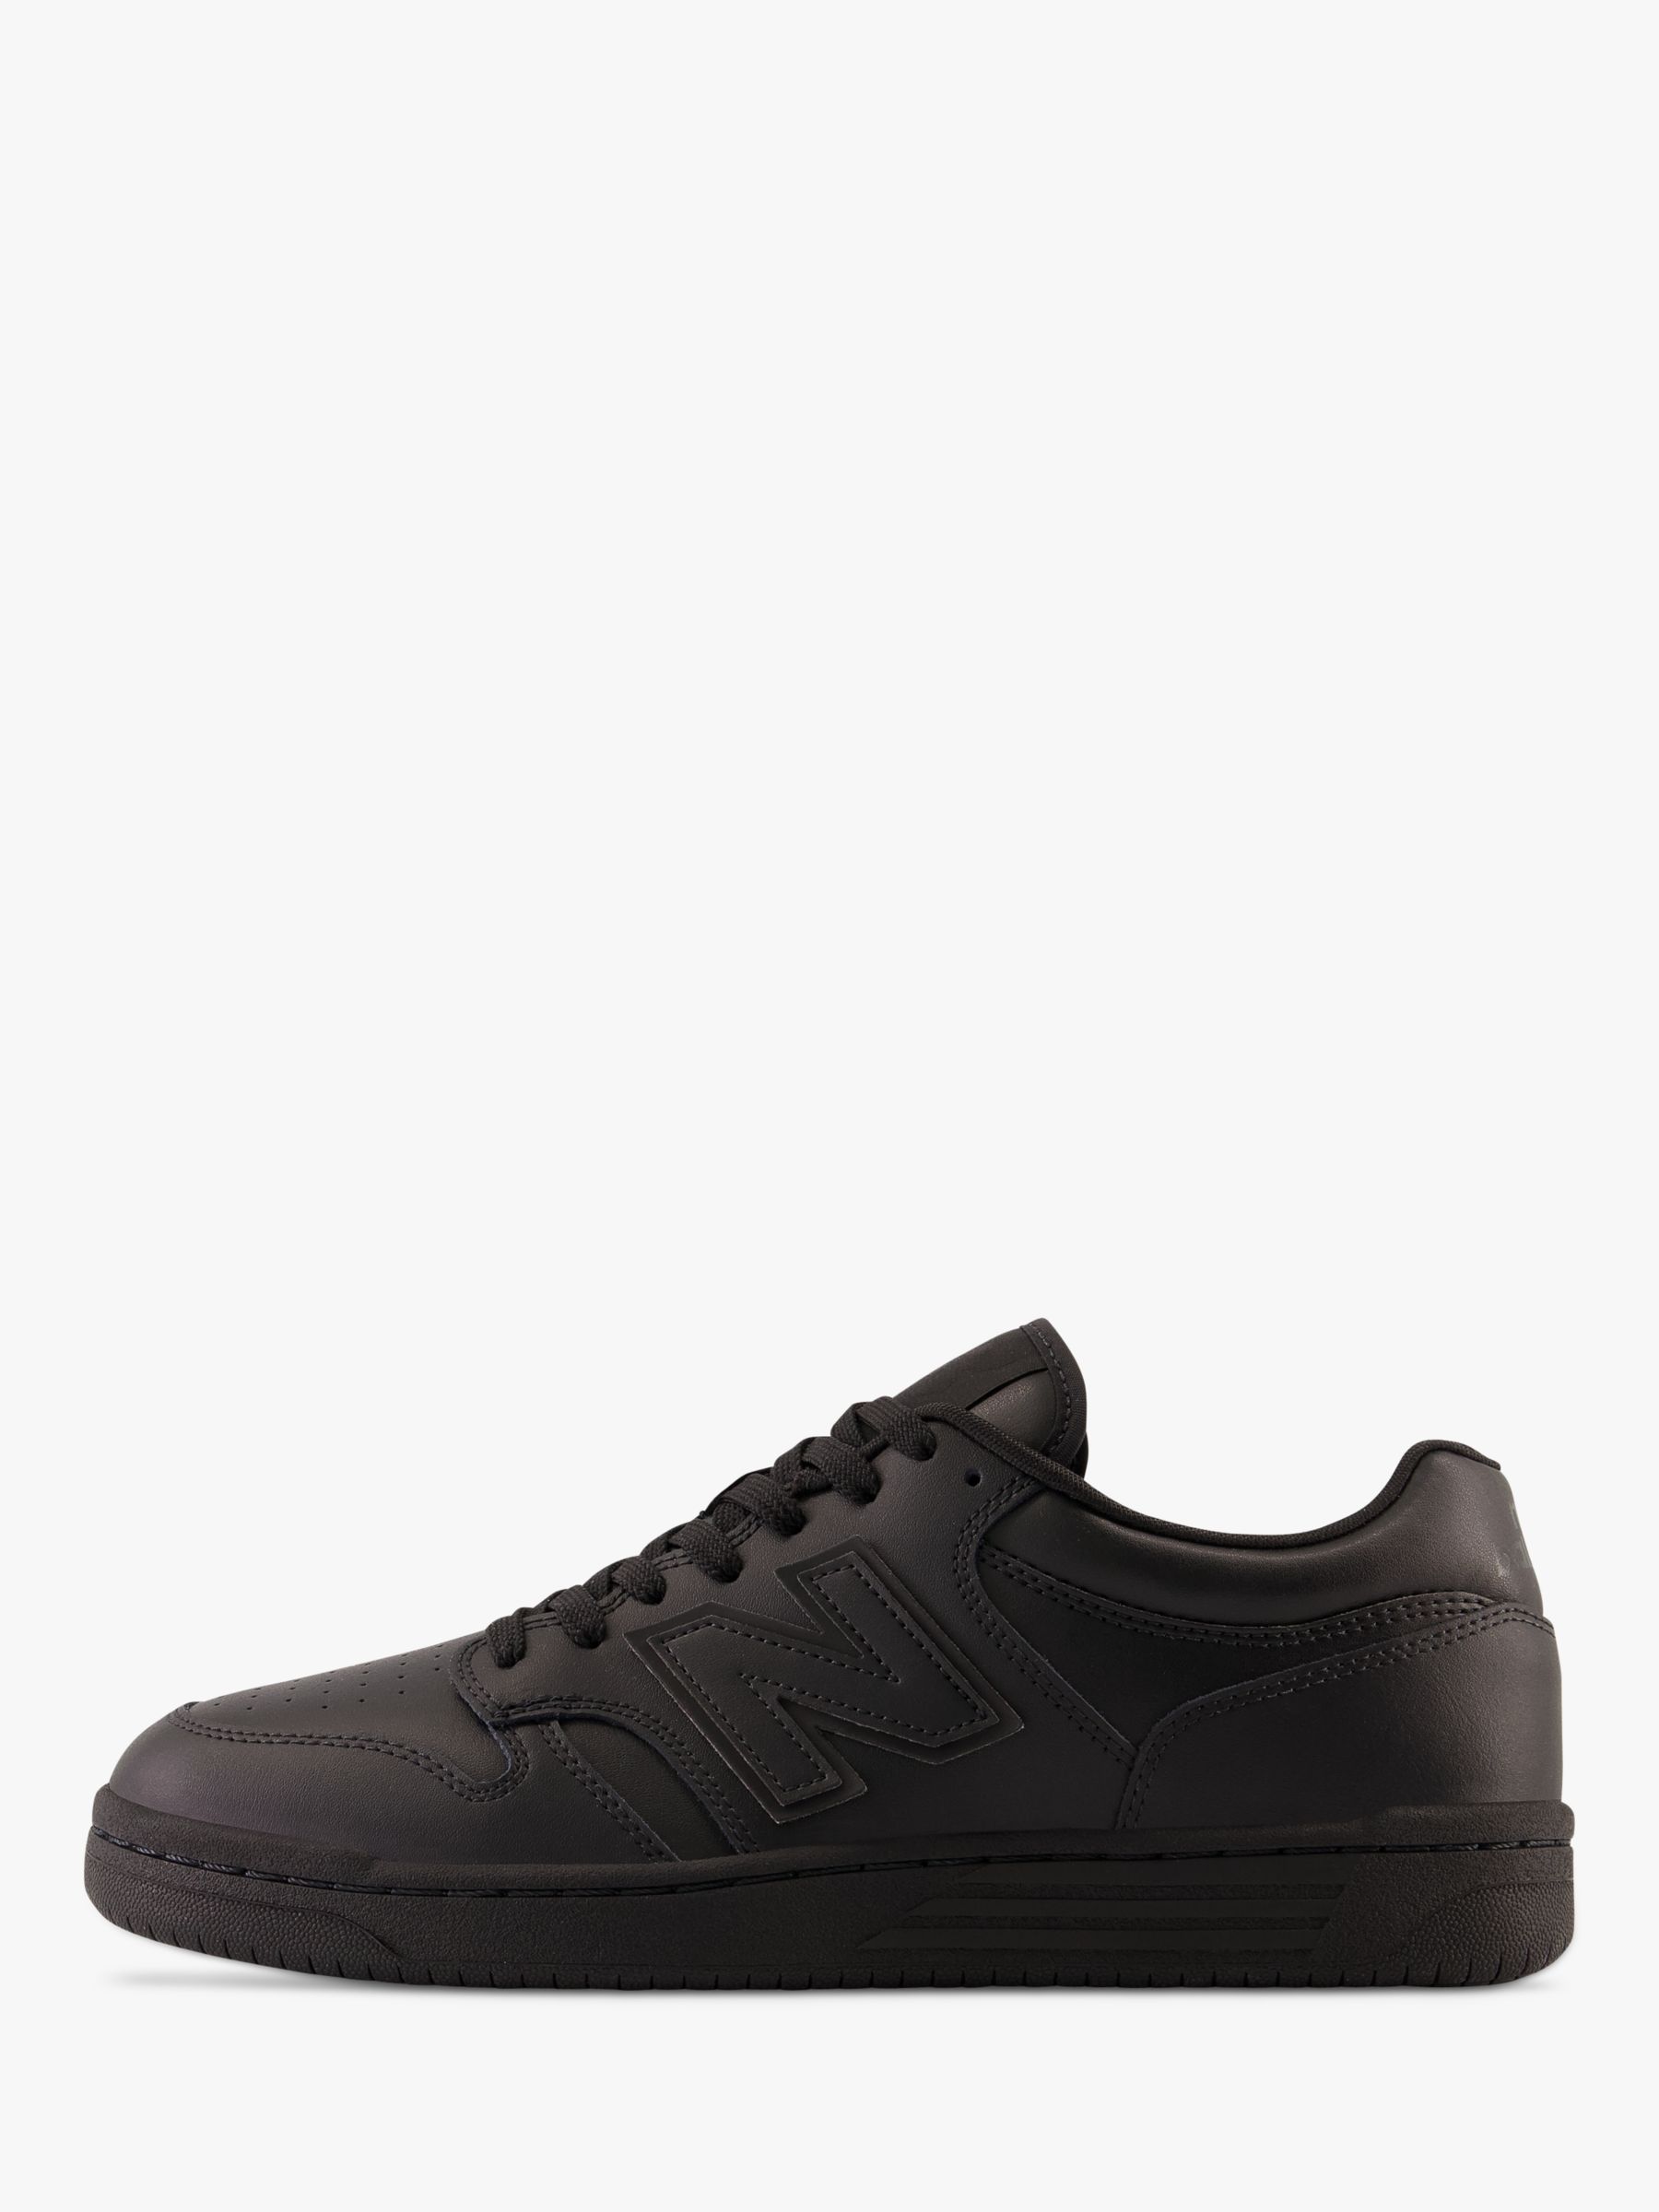 New Balance 480 Leather Lace Up Trainers, Triple Black, 9